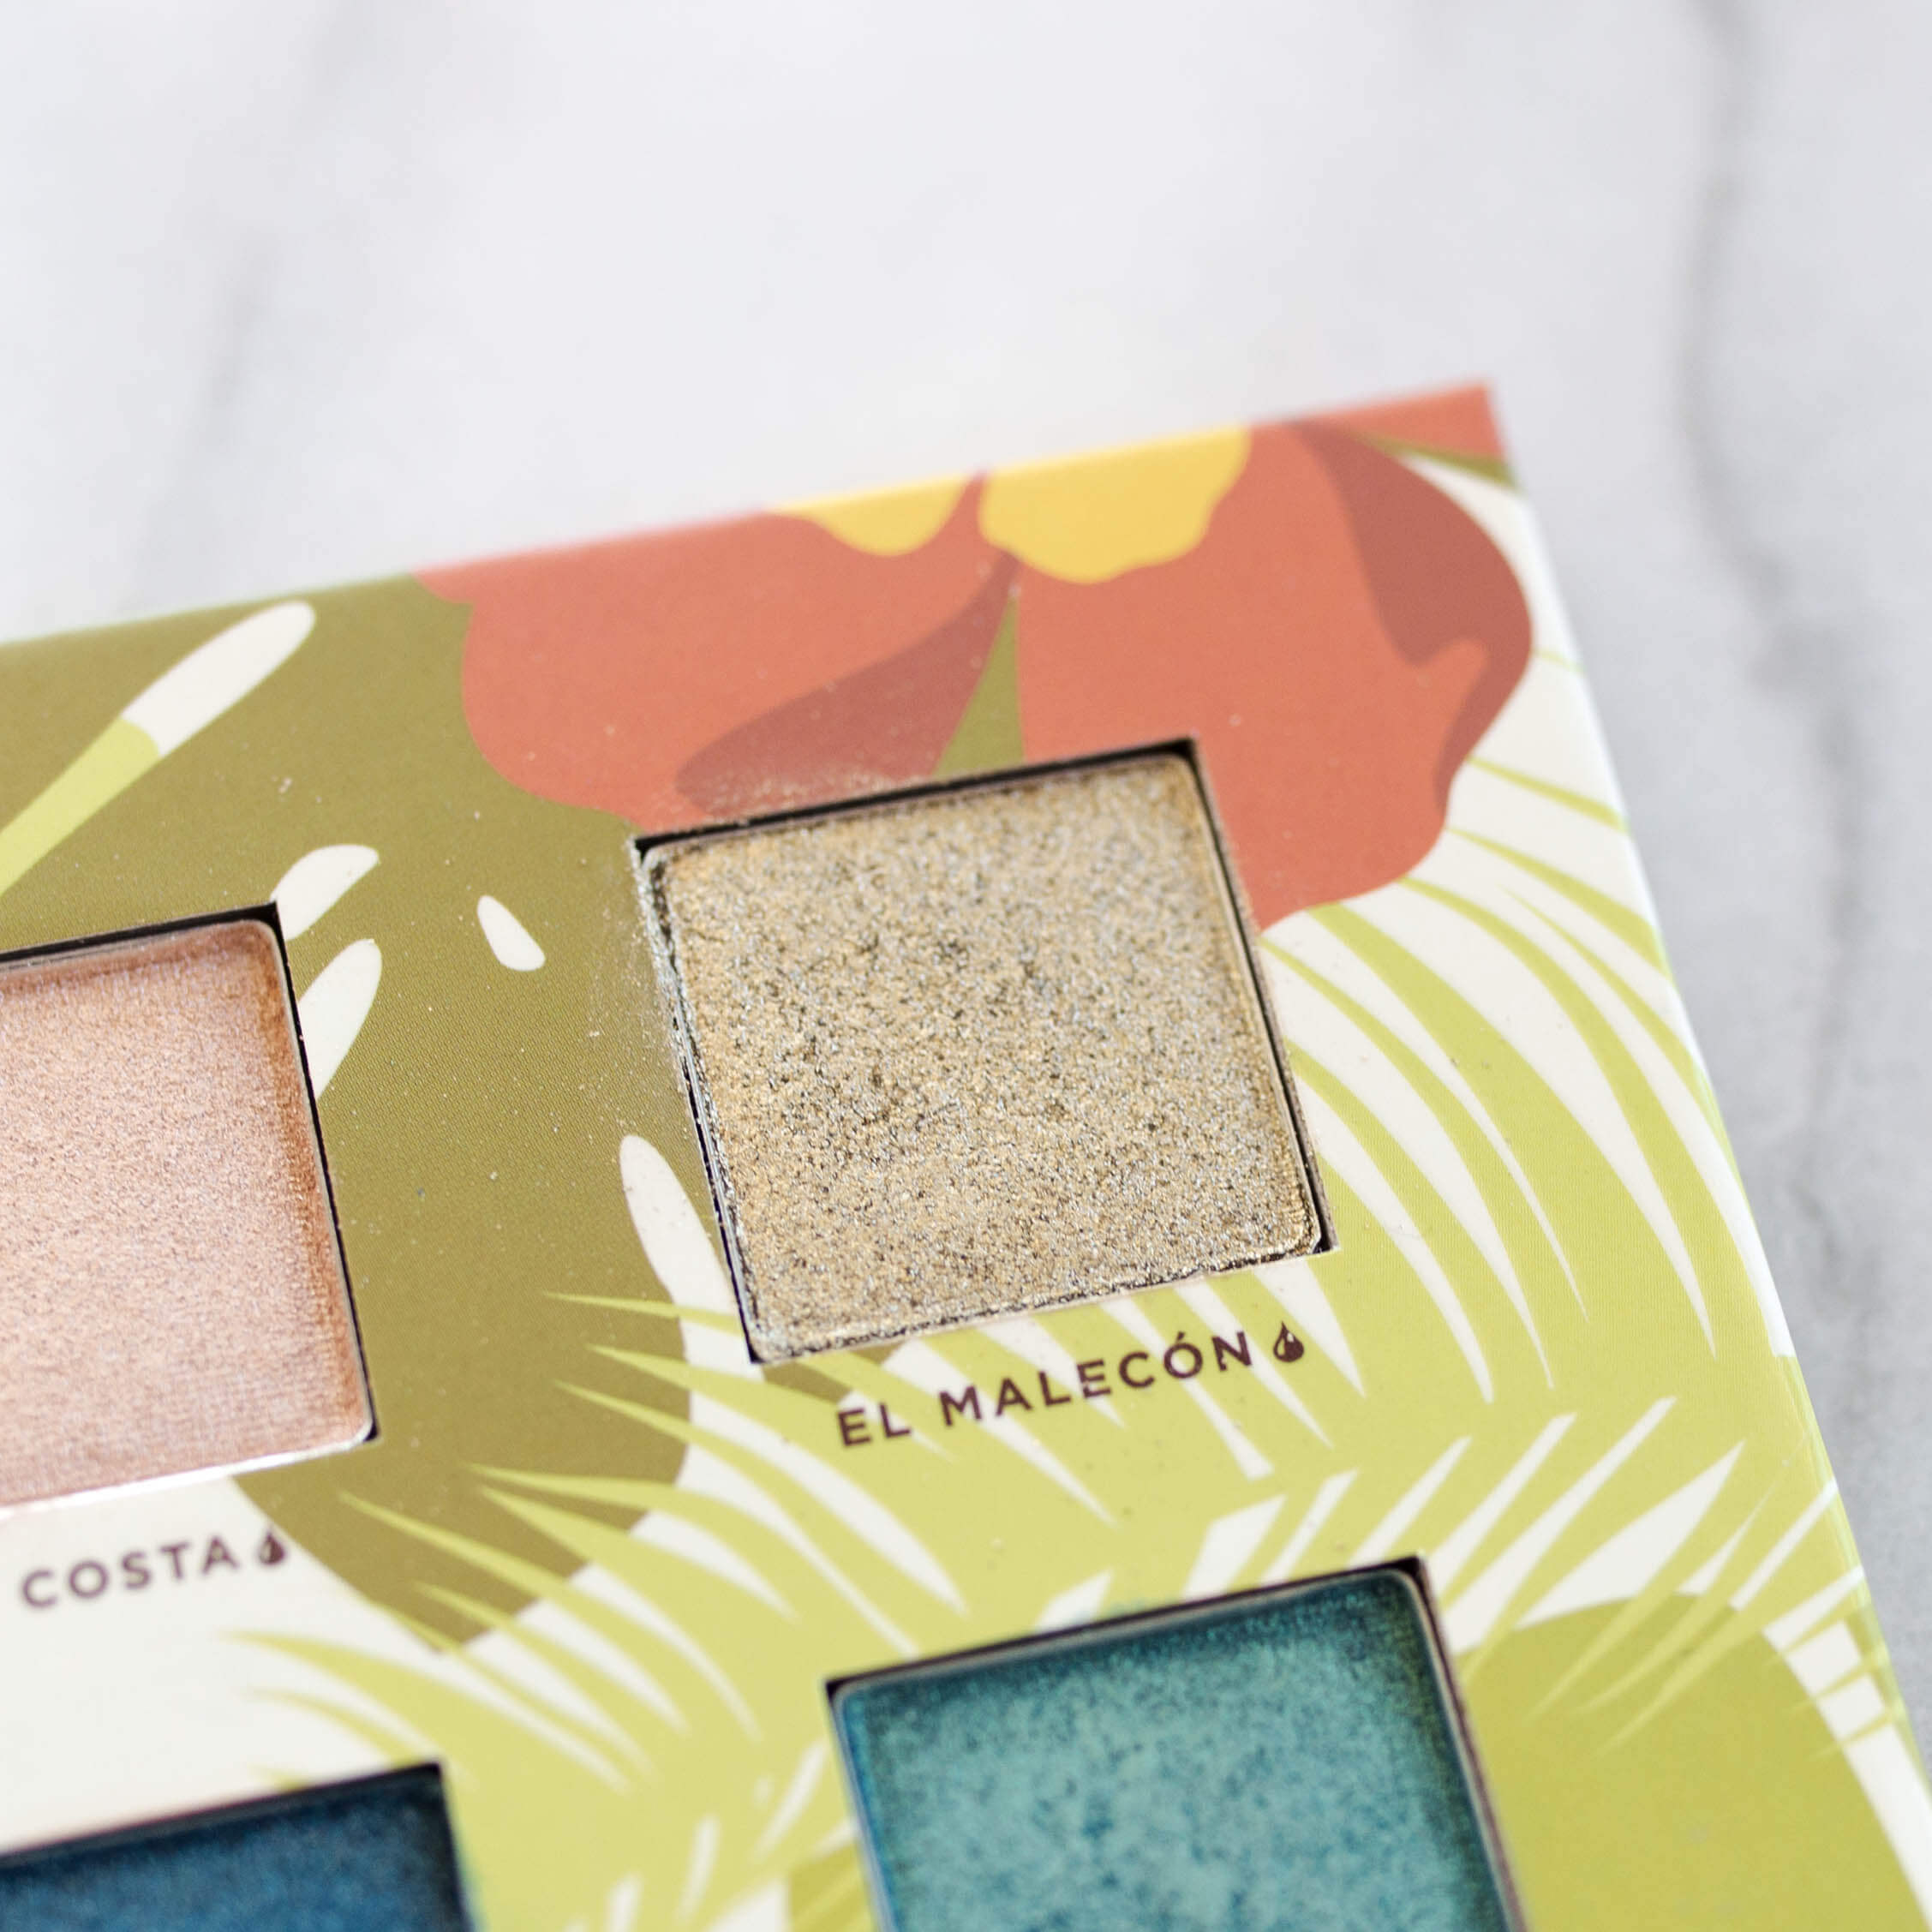 Alamar Cosmetics Reina Del Caribe Vol. 1 Palette Review + Swatches | Twinspiration